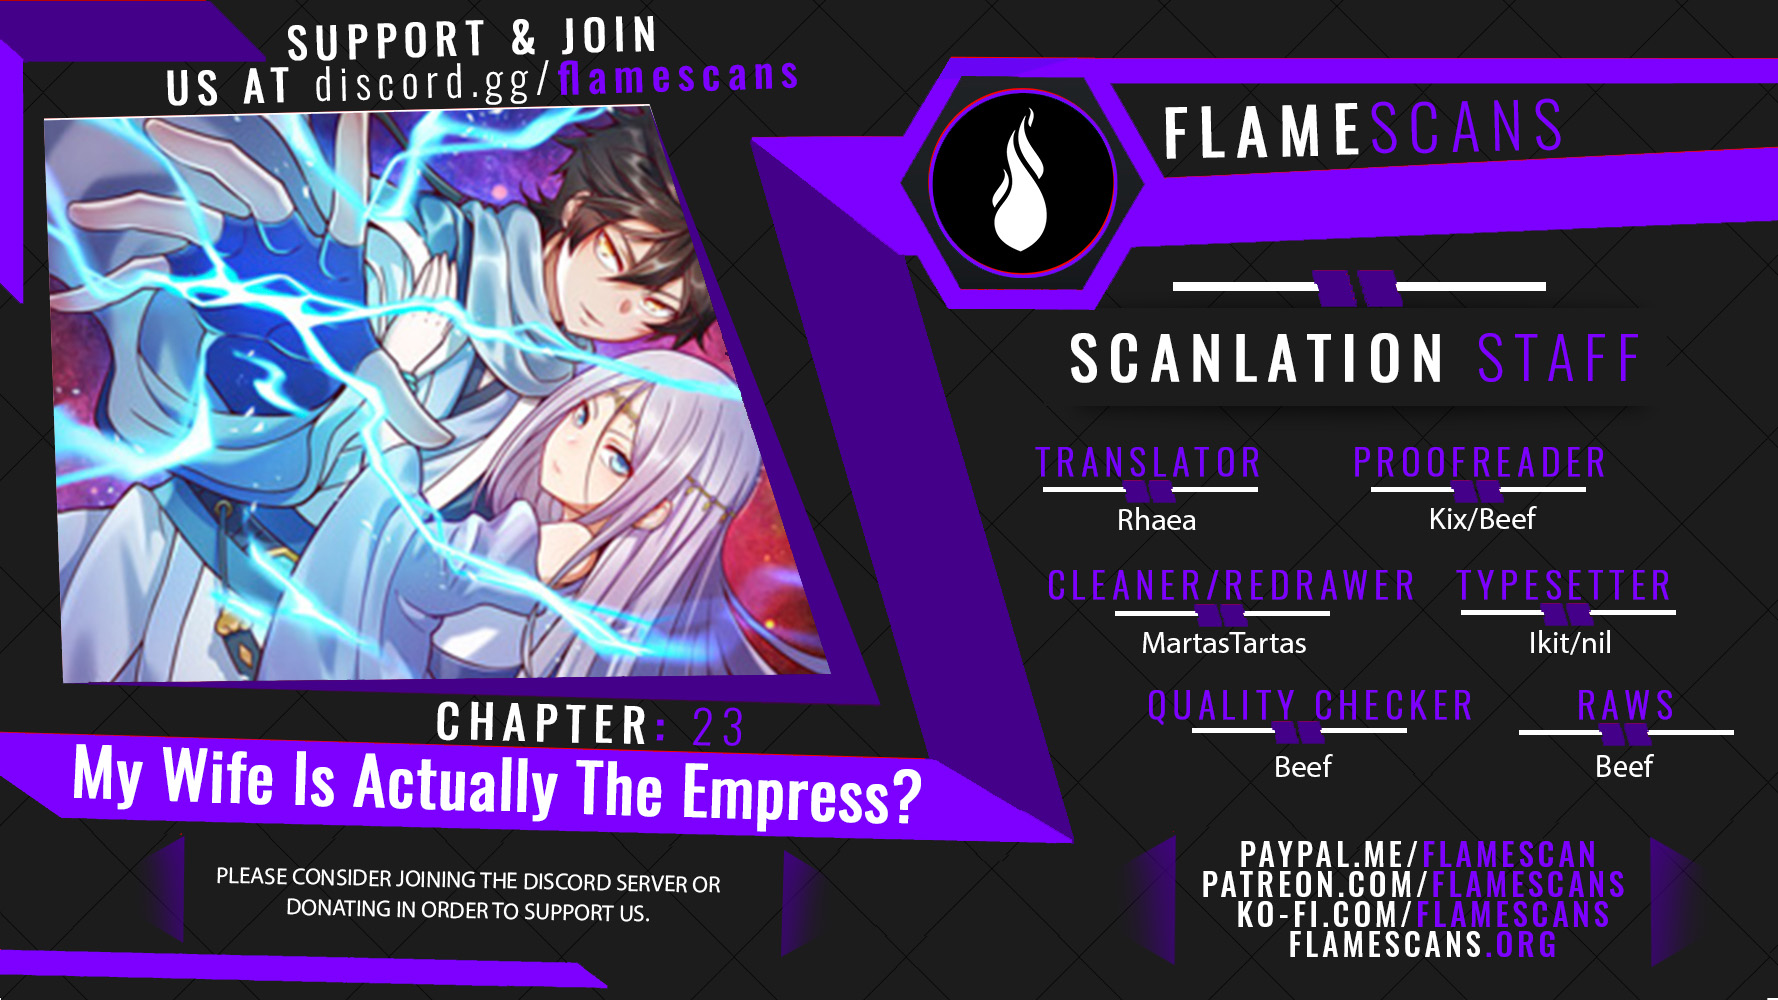 My Wife Is Actually The Empress? - Chapter 5853 - Image 1